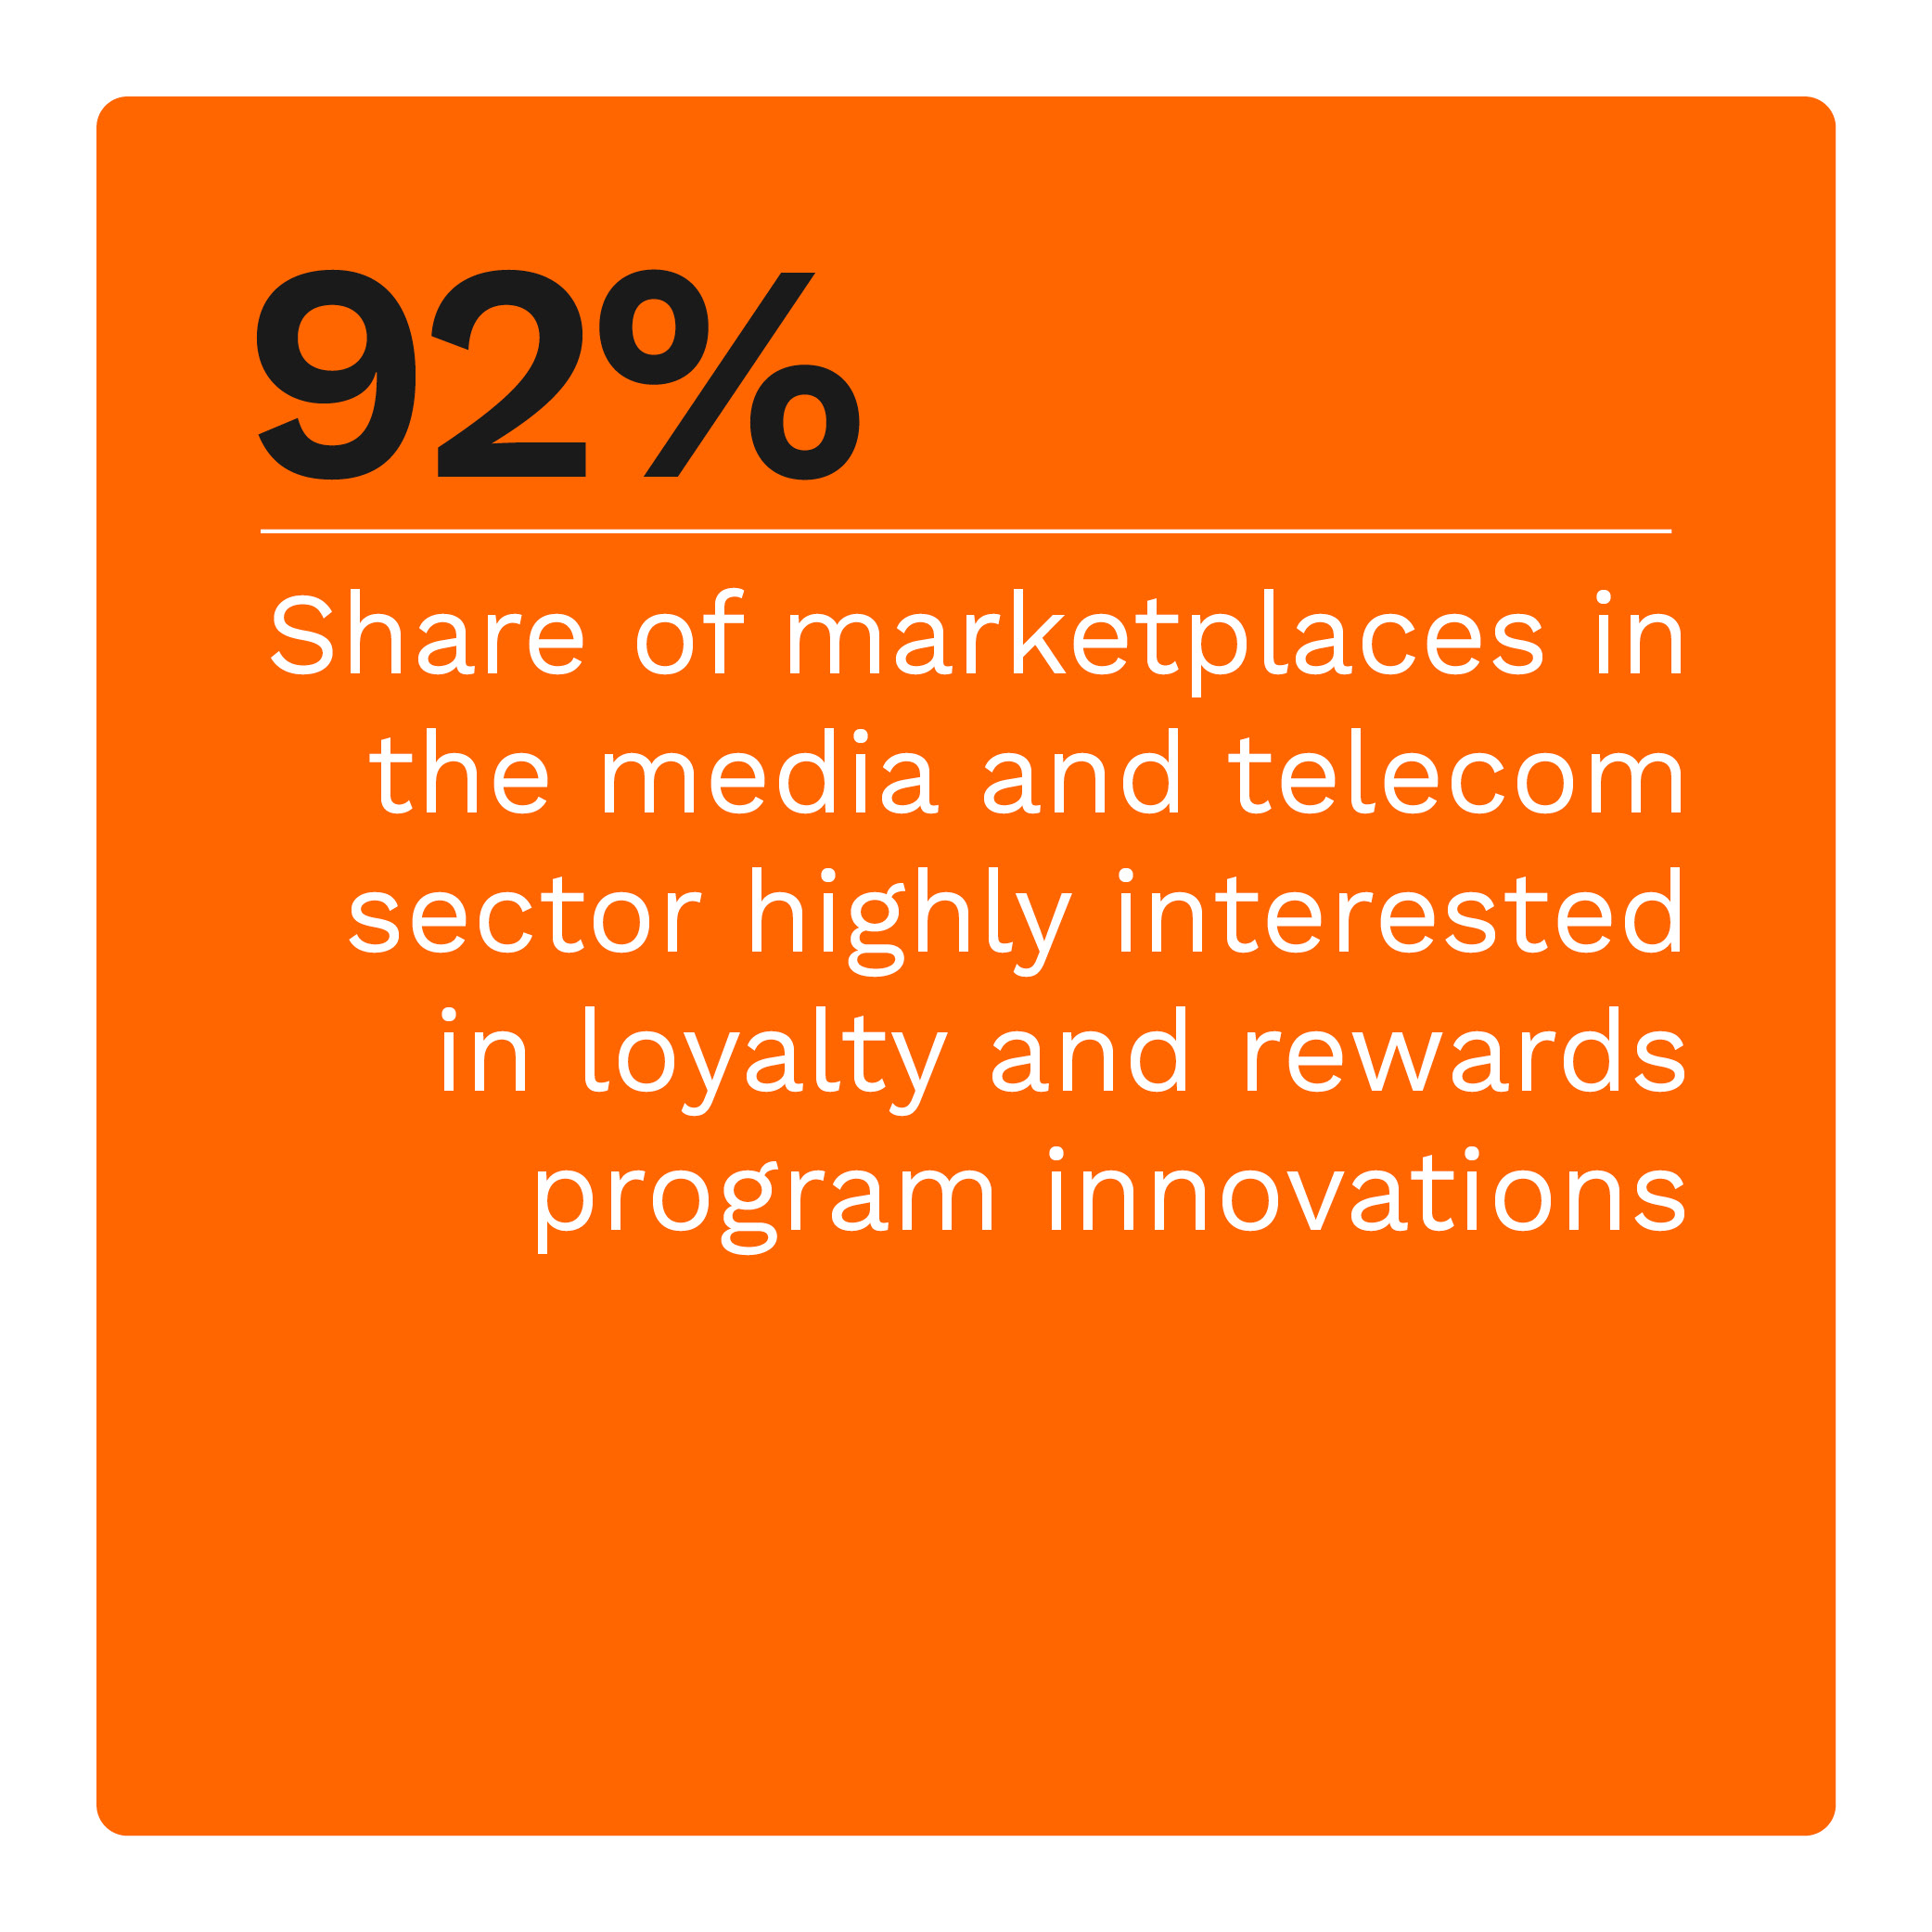  Share of marketplaces in the media and telecom sector highly interested in loyalty and rewards program innovations